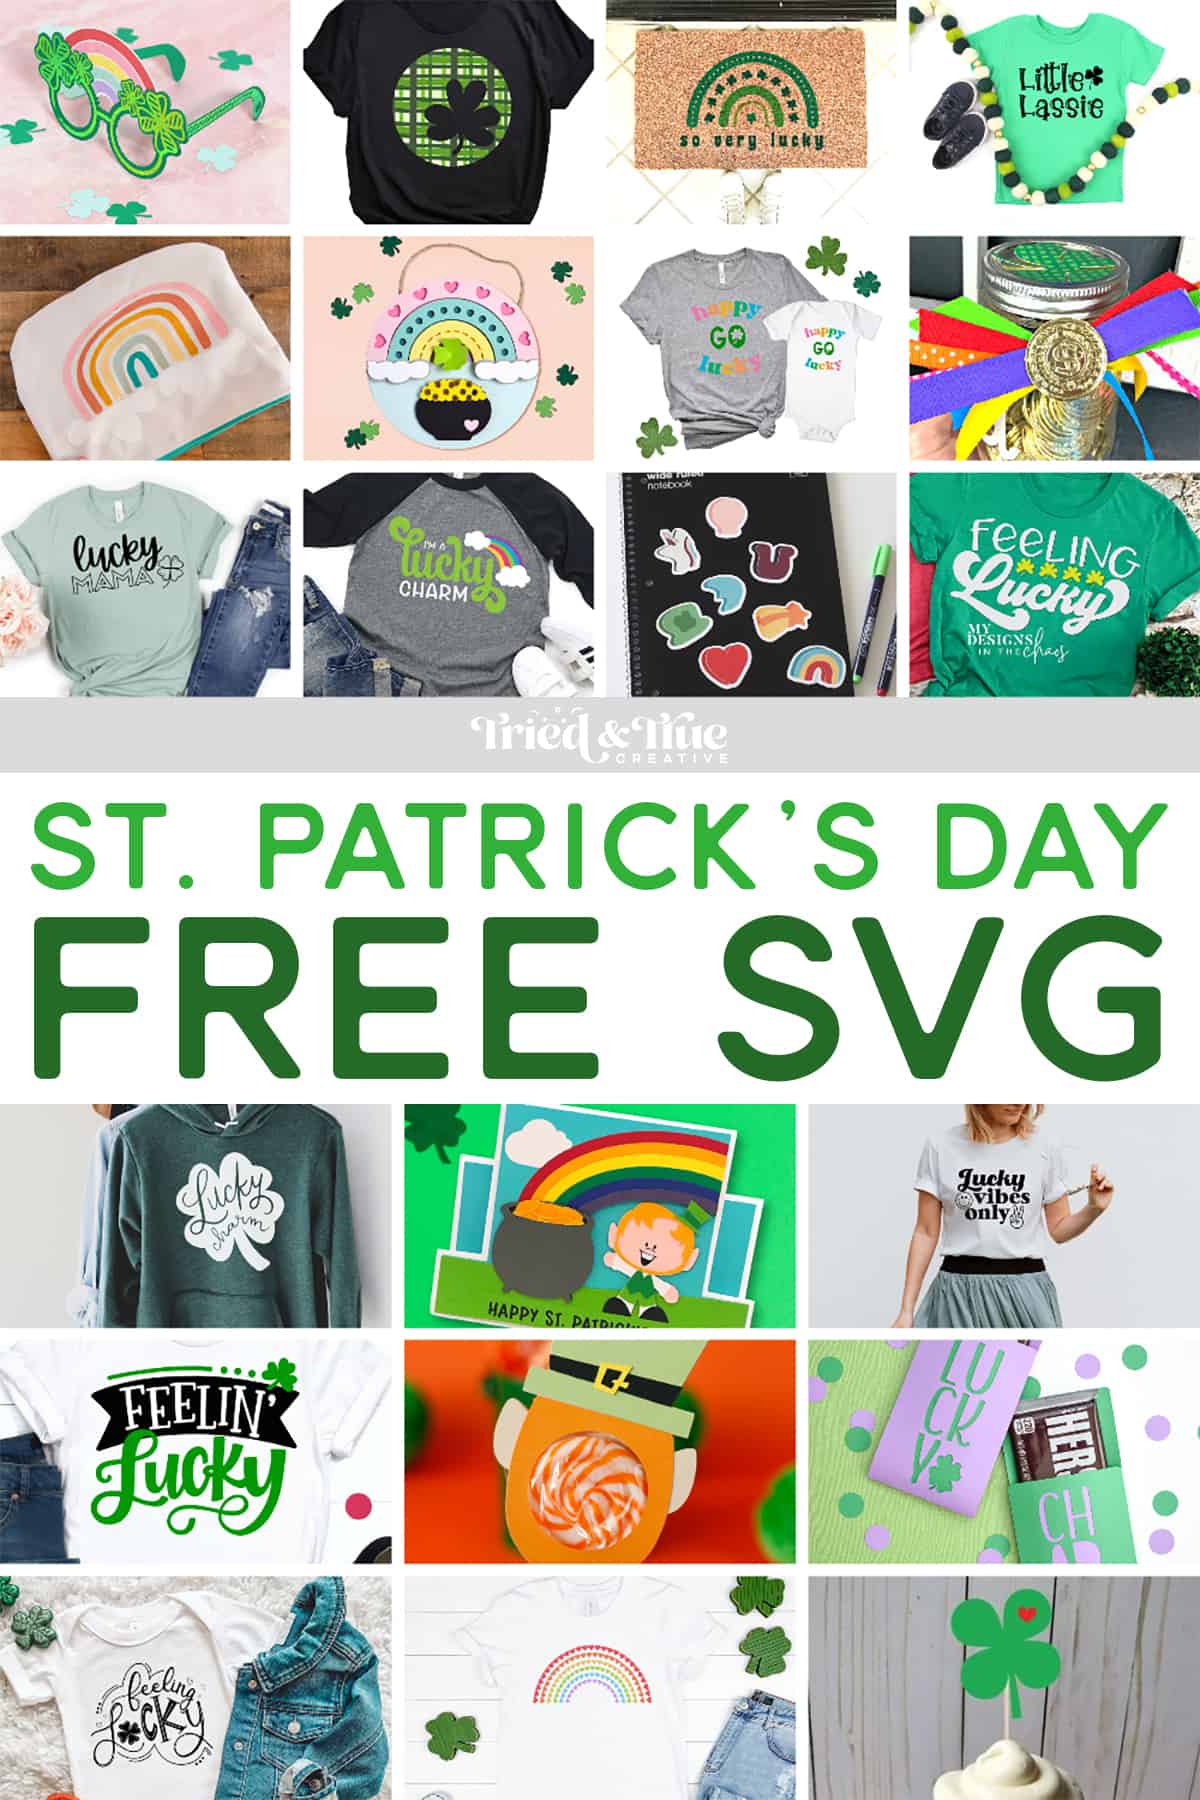 Check out these 20+ St. Patrick Day Free SVG files!